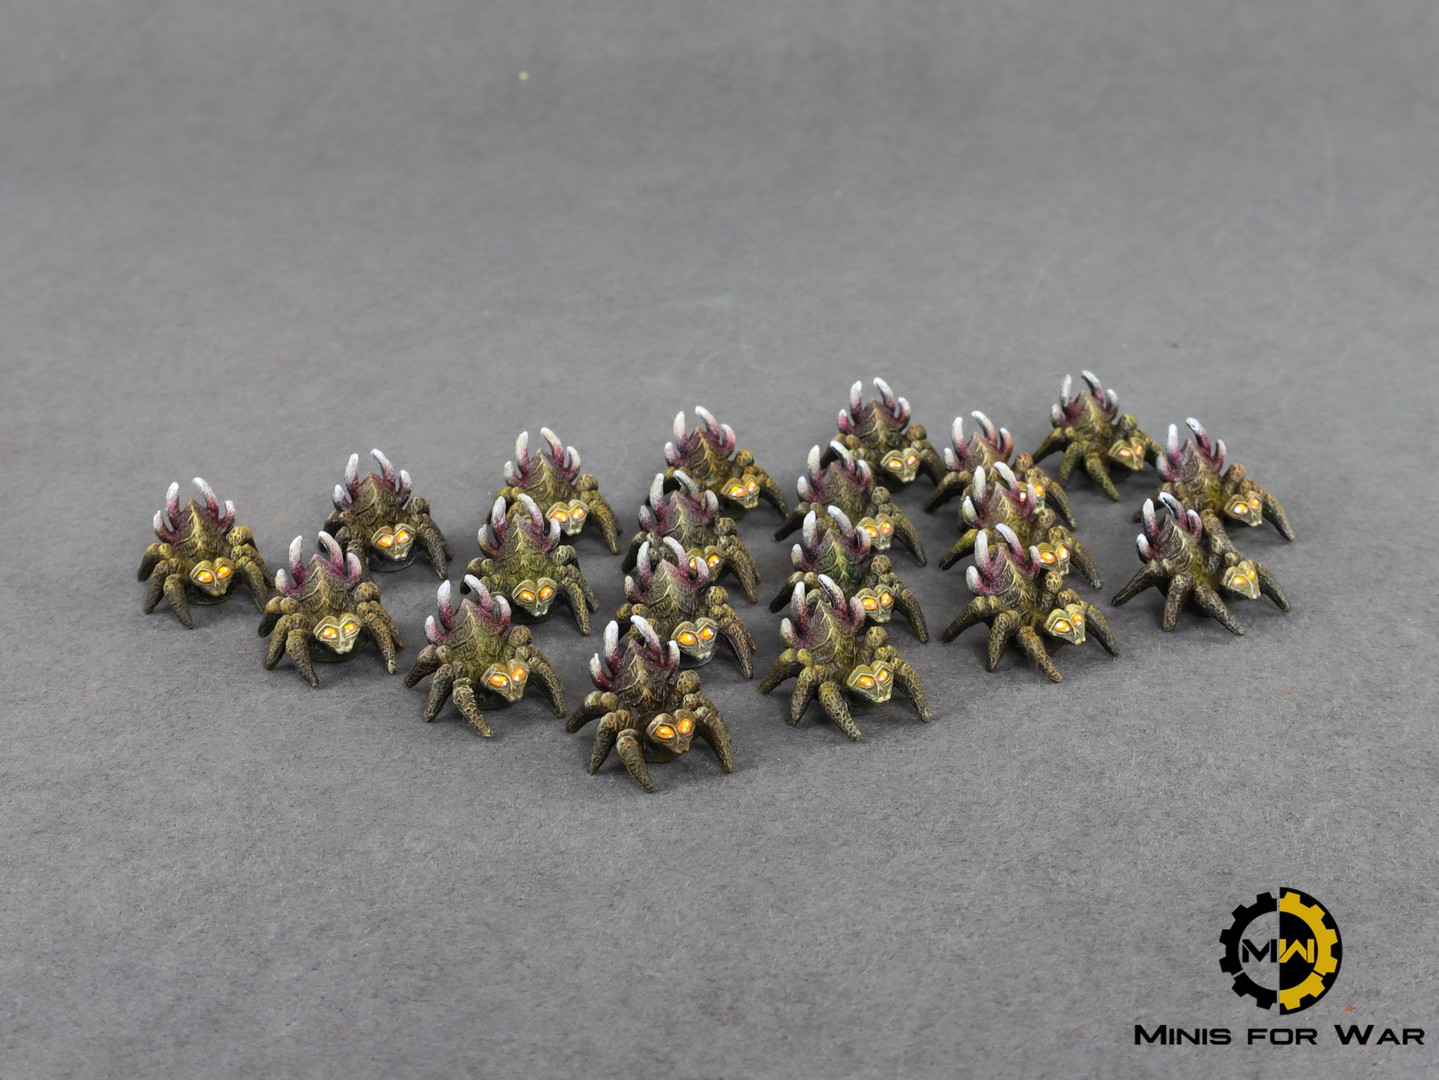 Board Game - Space Cadets: Mission Away - Minis For War Painting Studio